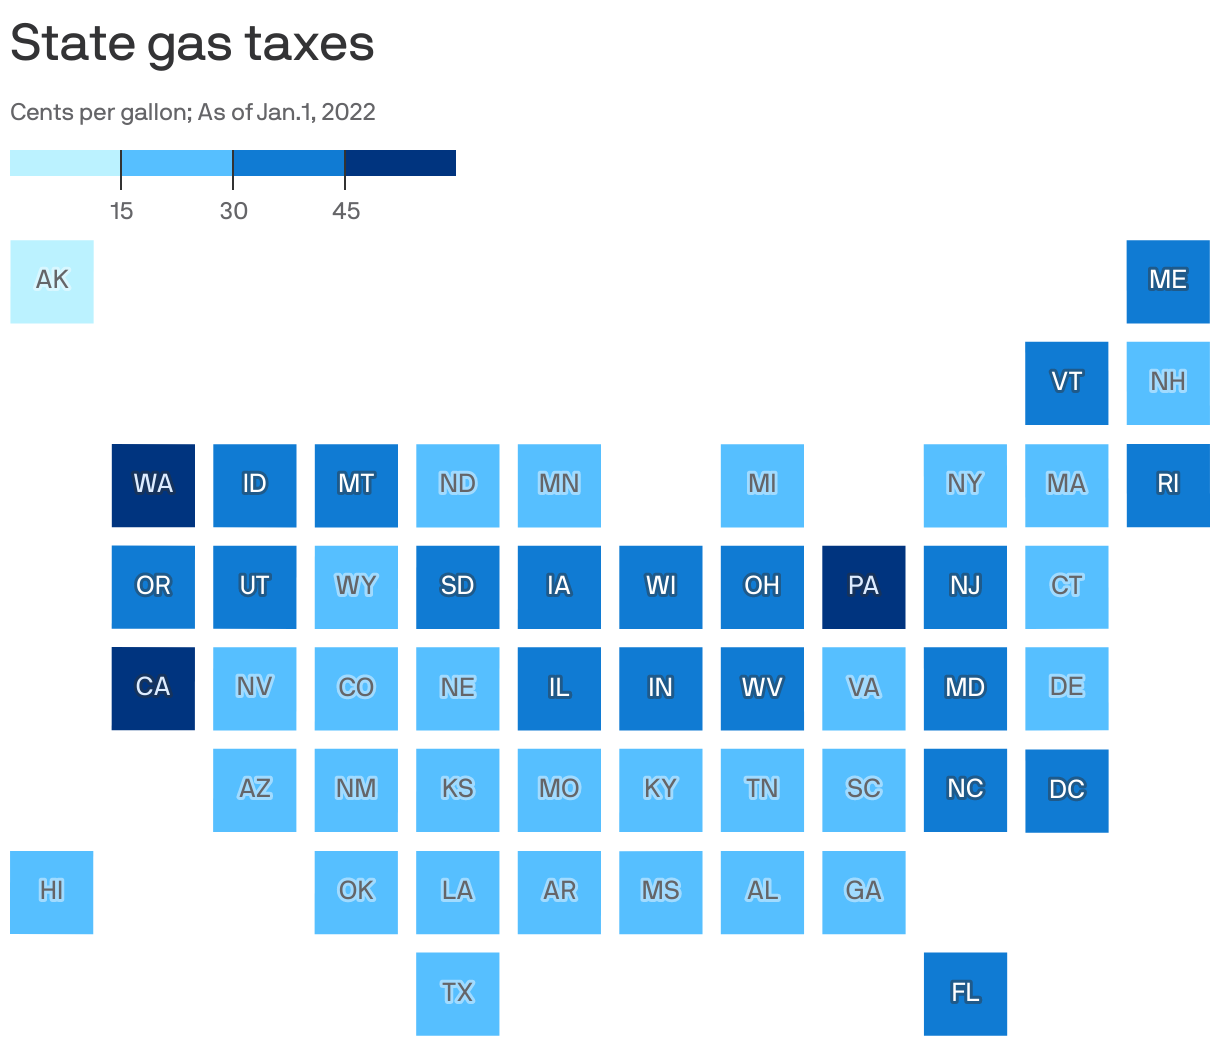 State gas taxes